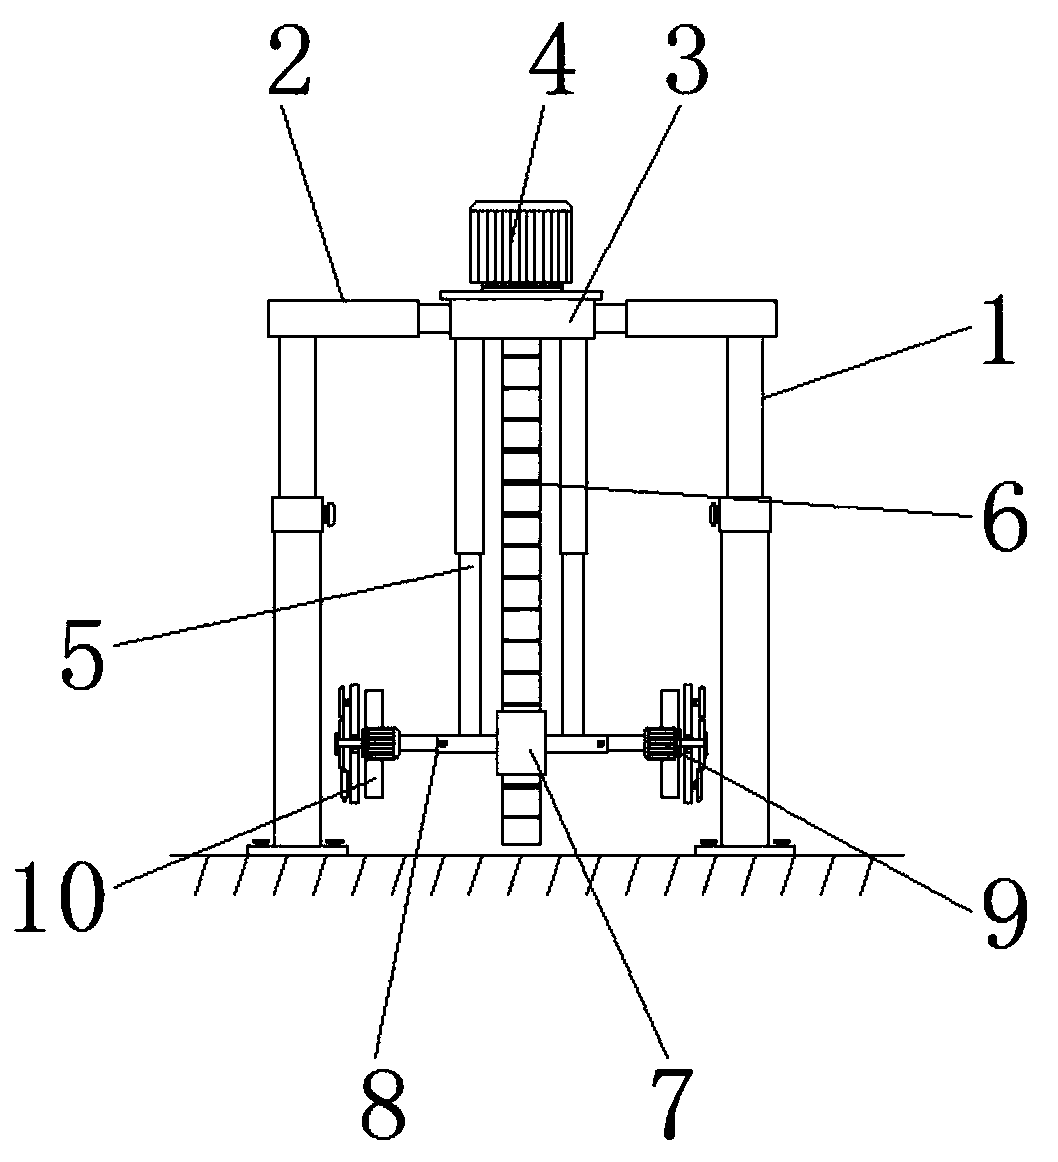 A Friction Stir Welding Device for Aerospace Cylinder Structural Parts